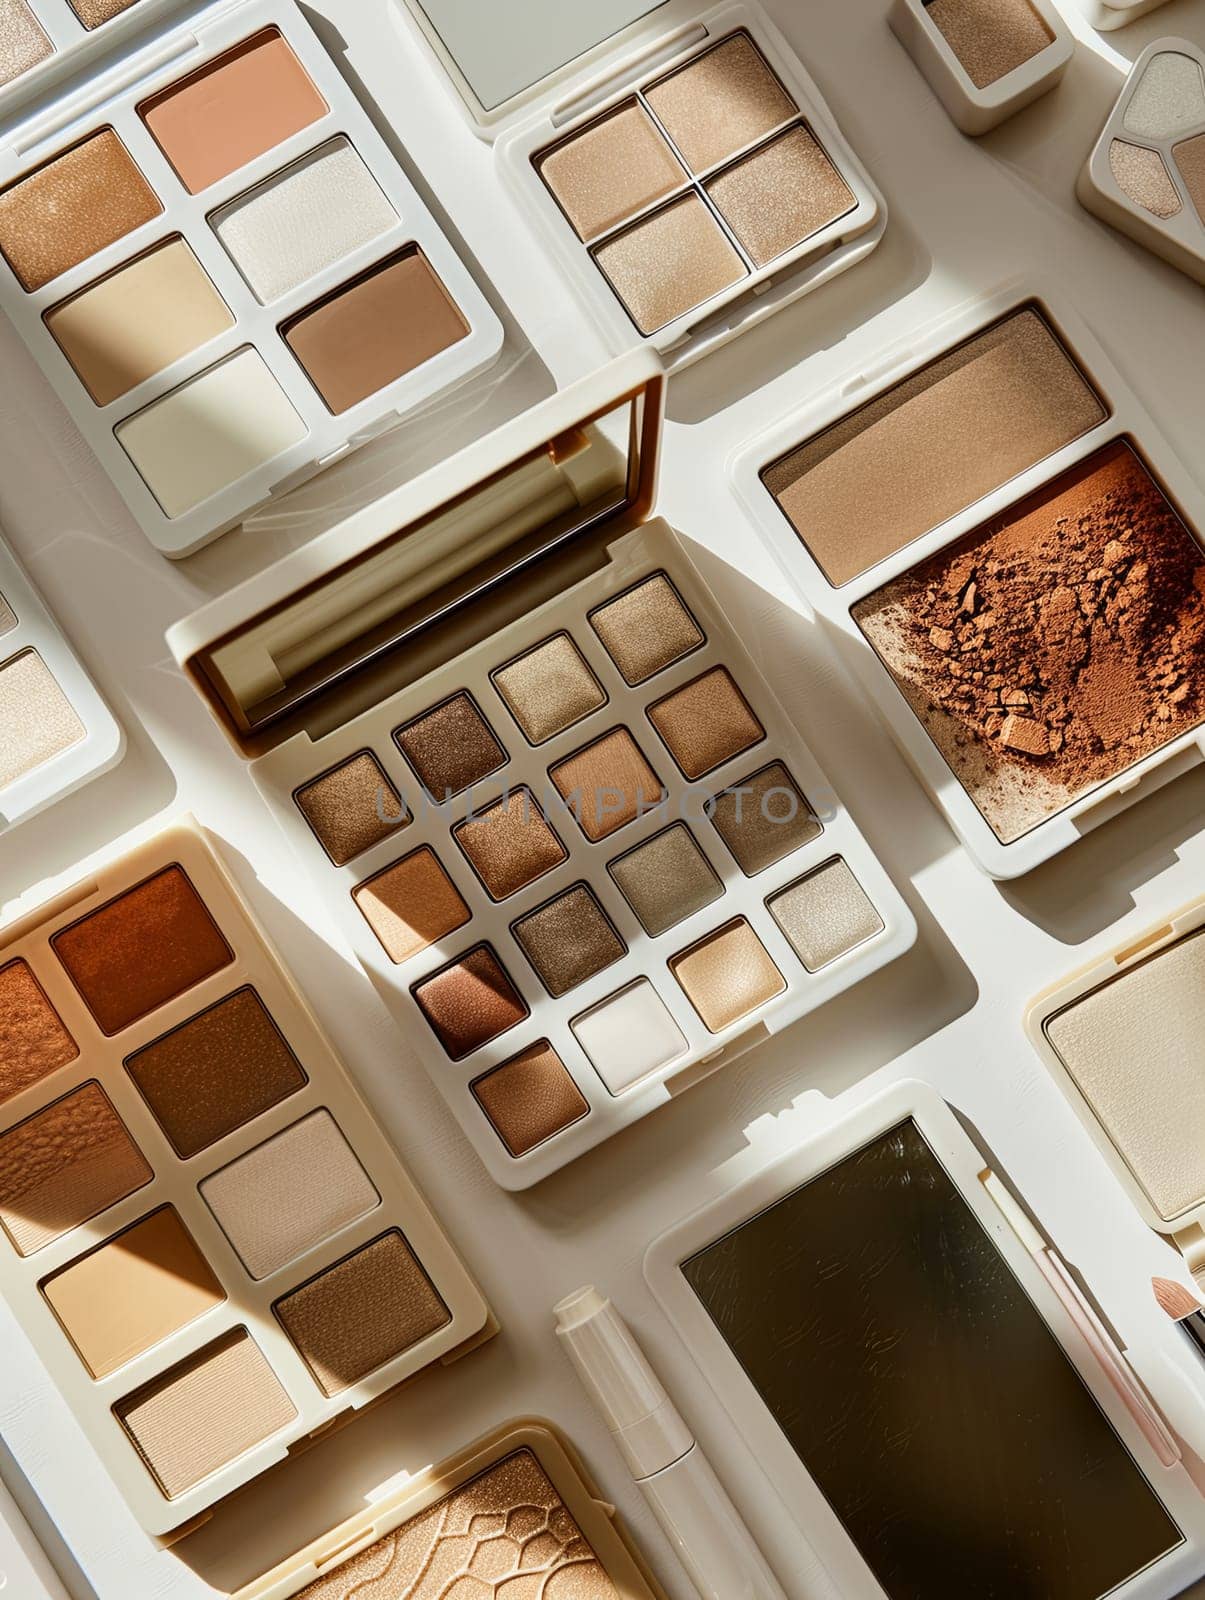 A variety of eyeshadow, contour, and highlighter palettes with warm tones arranged on a light background.